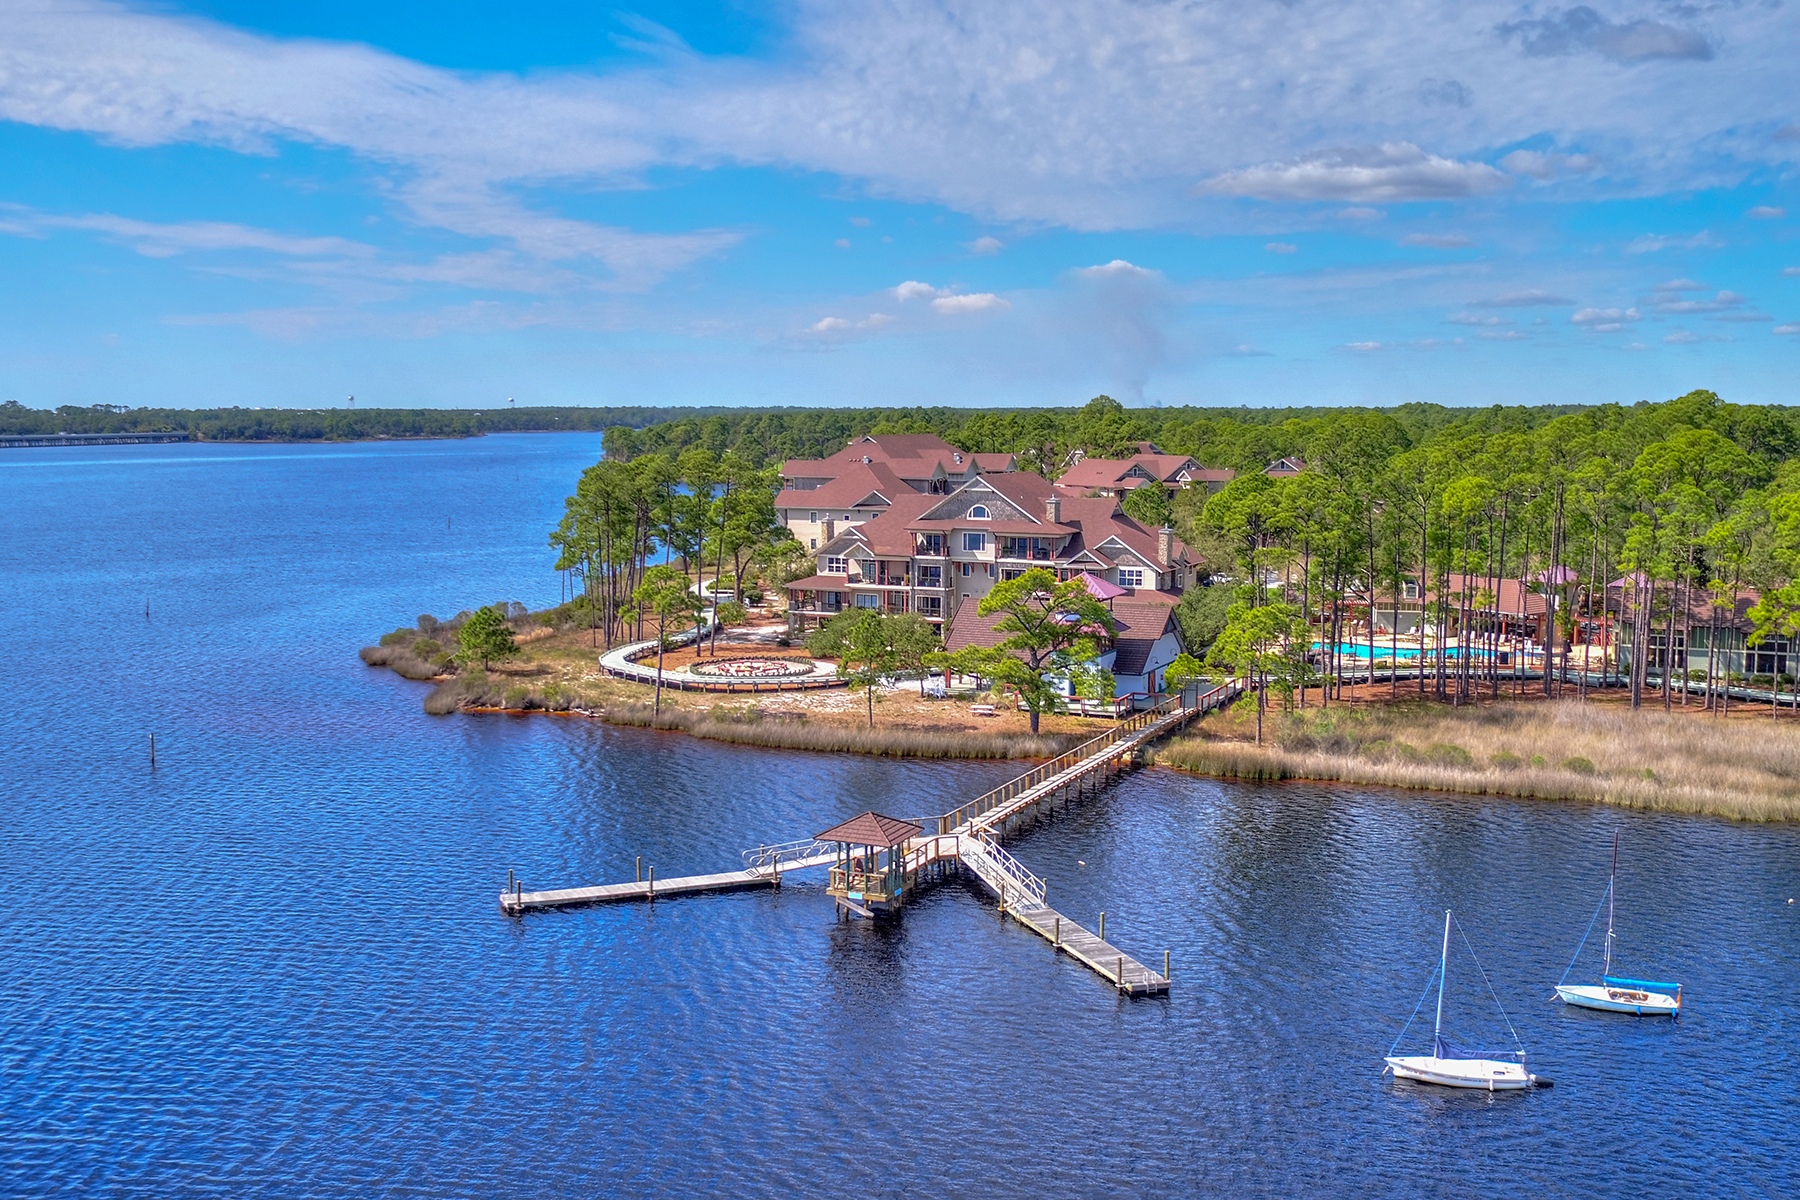 An aerial view of homes at Wild Heron showing a board walk over the lake